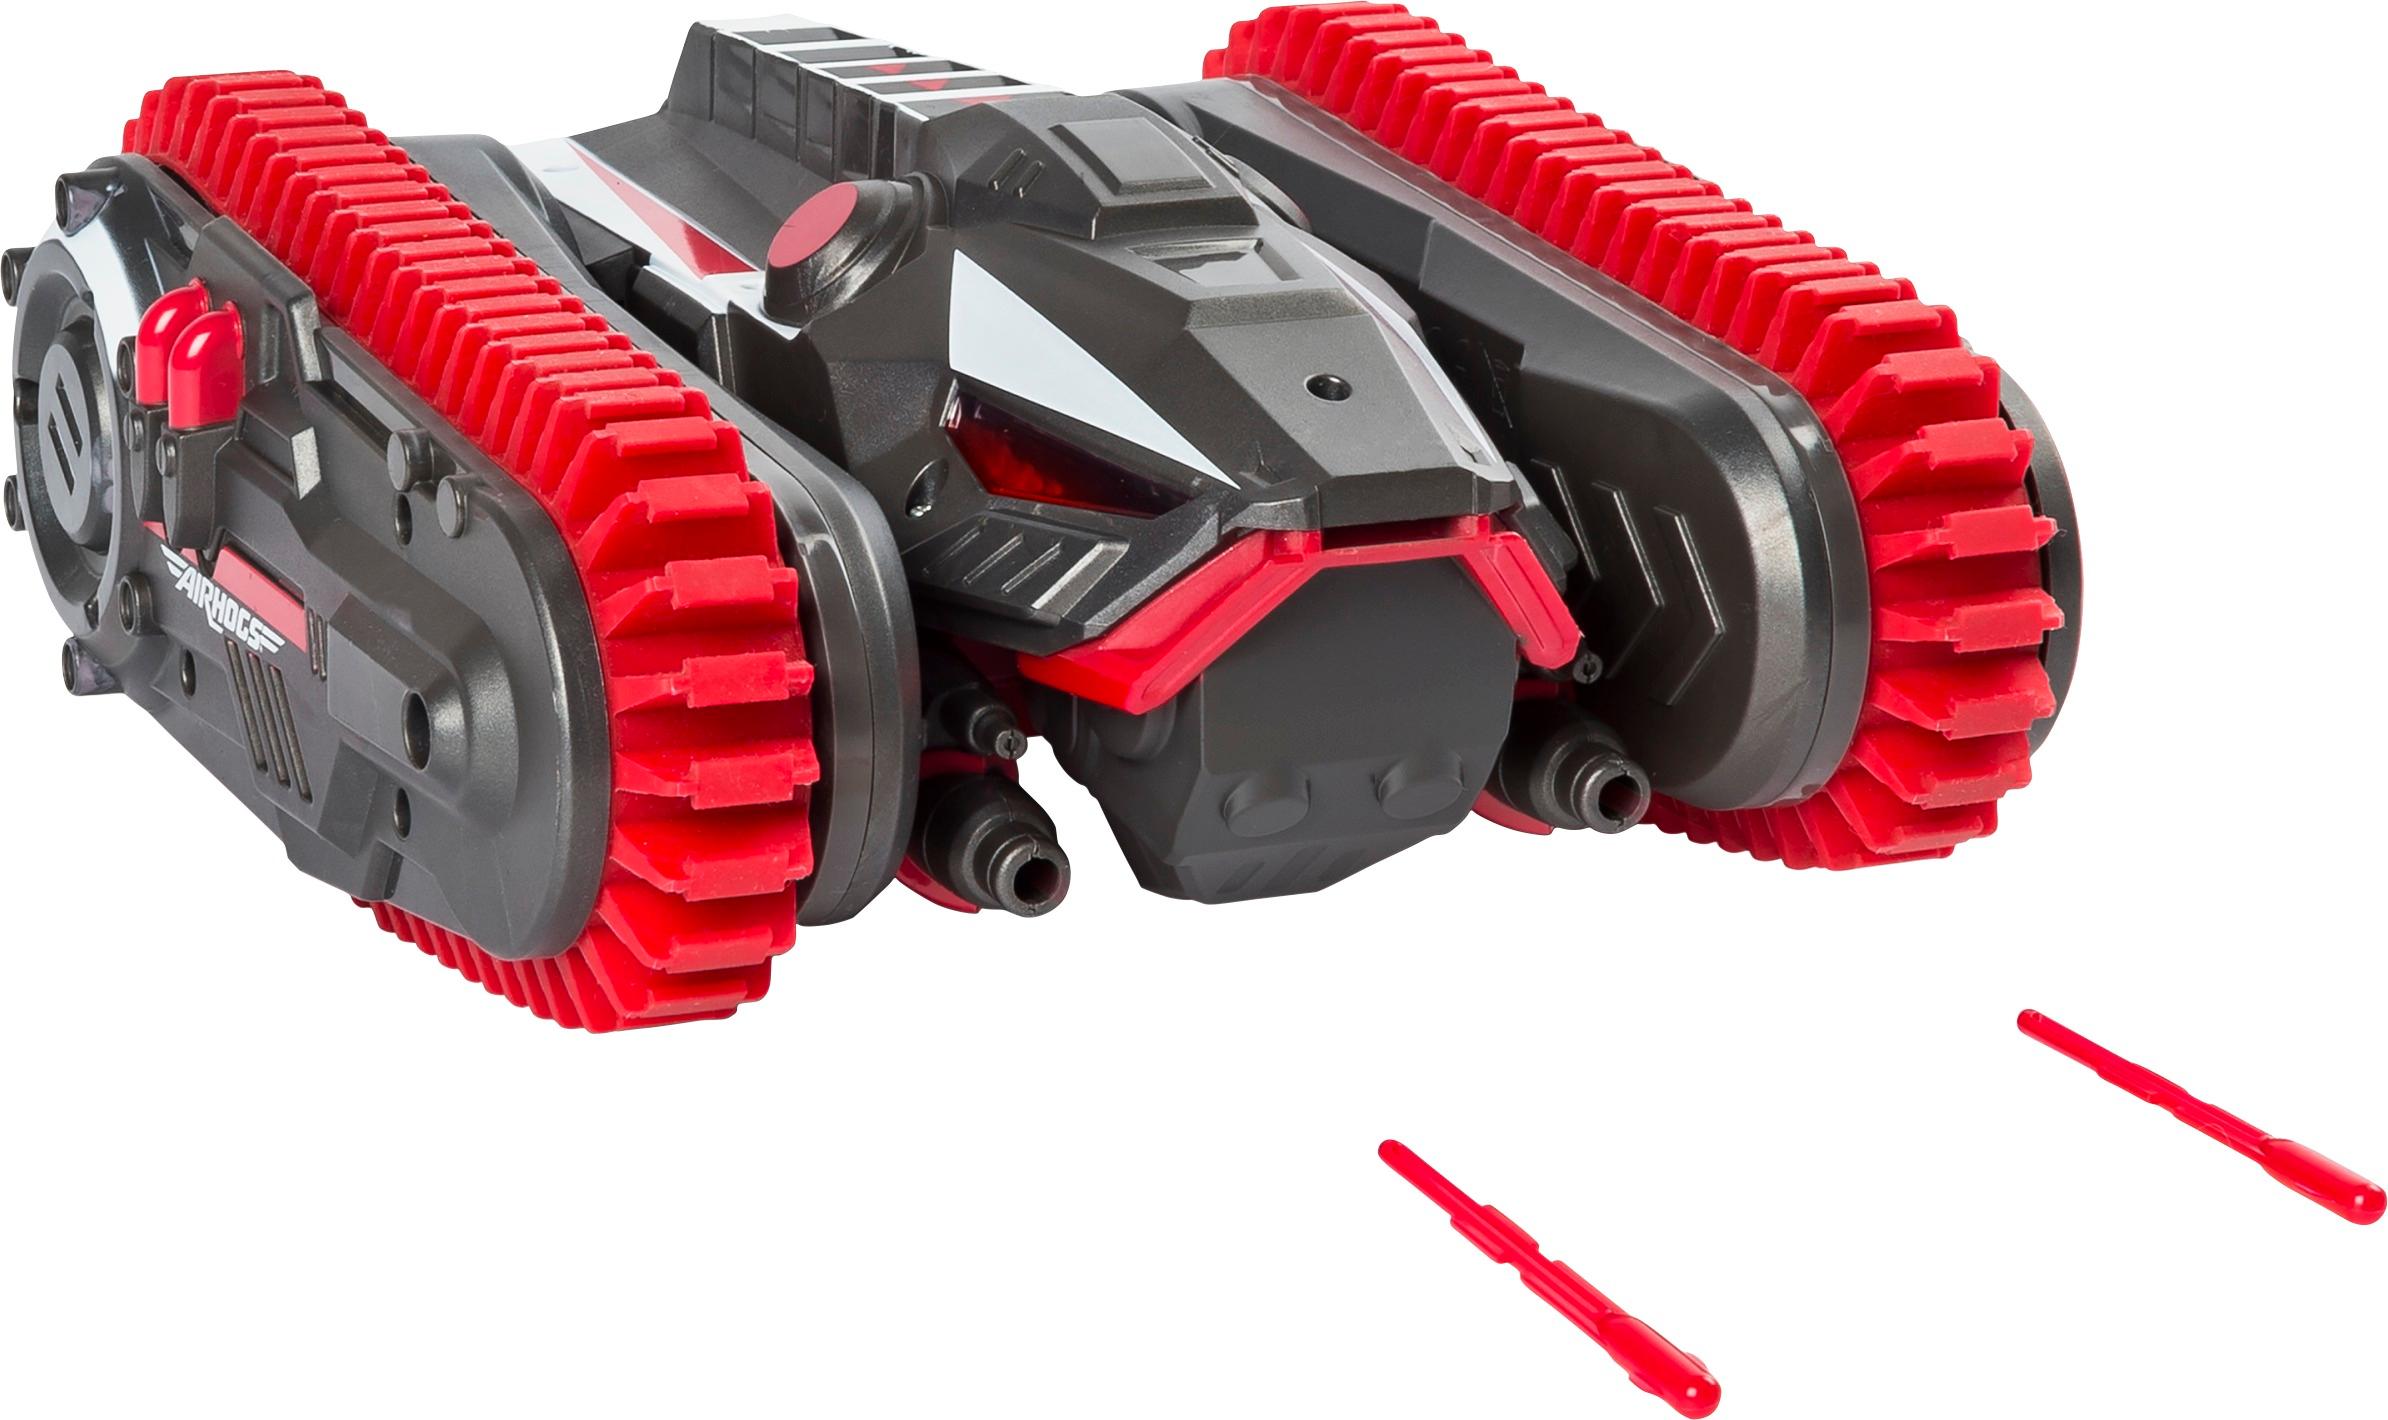 Air Hogs Robo Trax Tank with Robot Transformation for sale online 